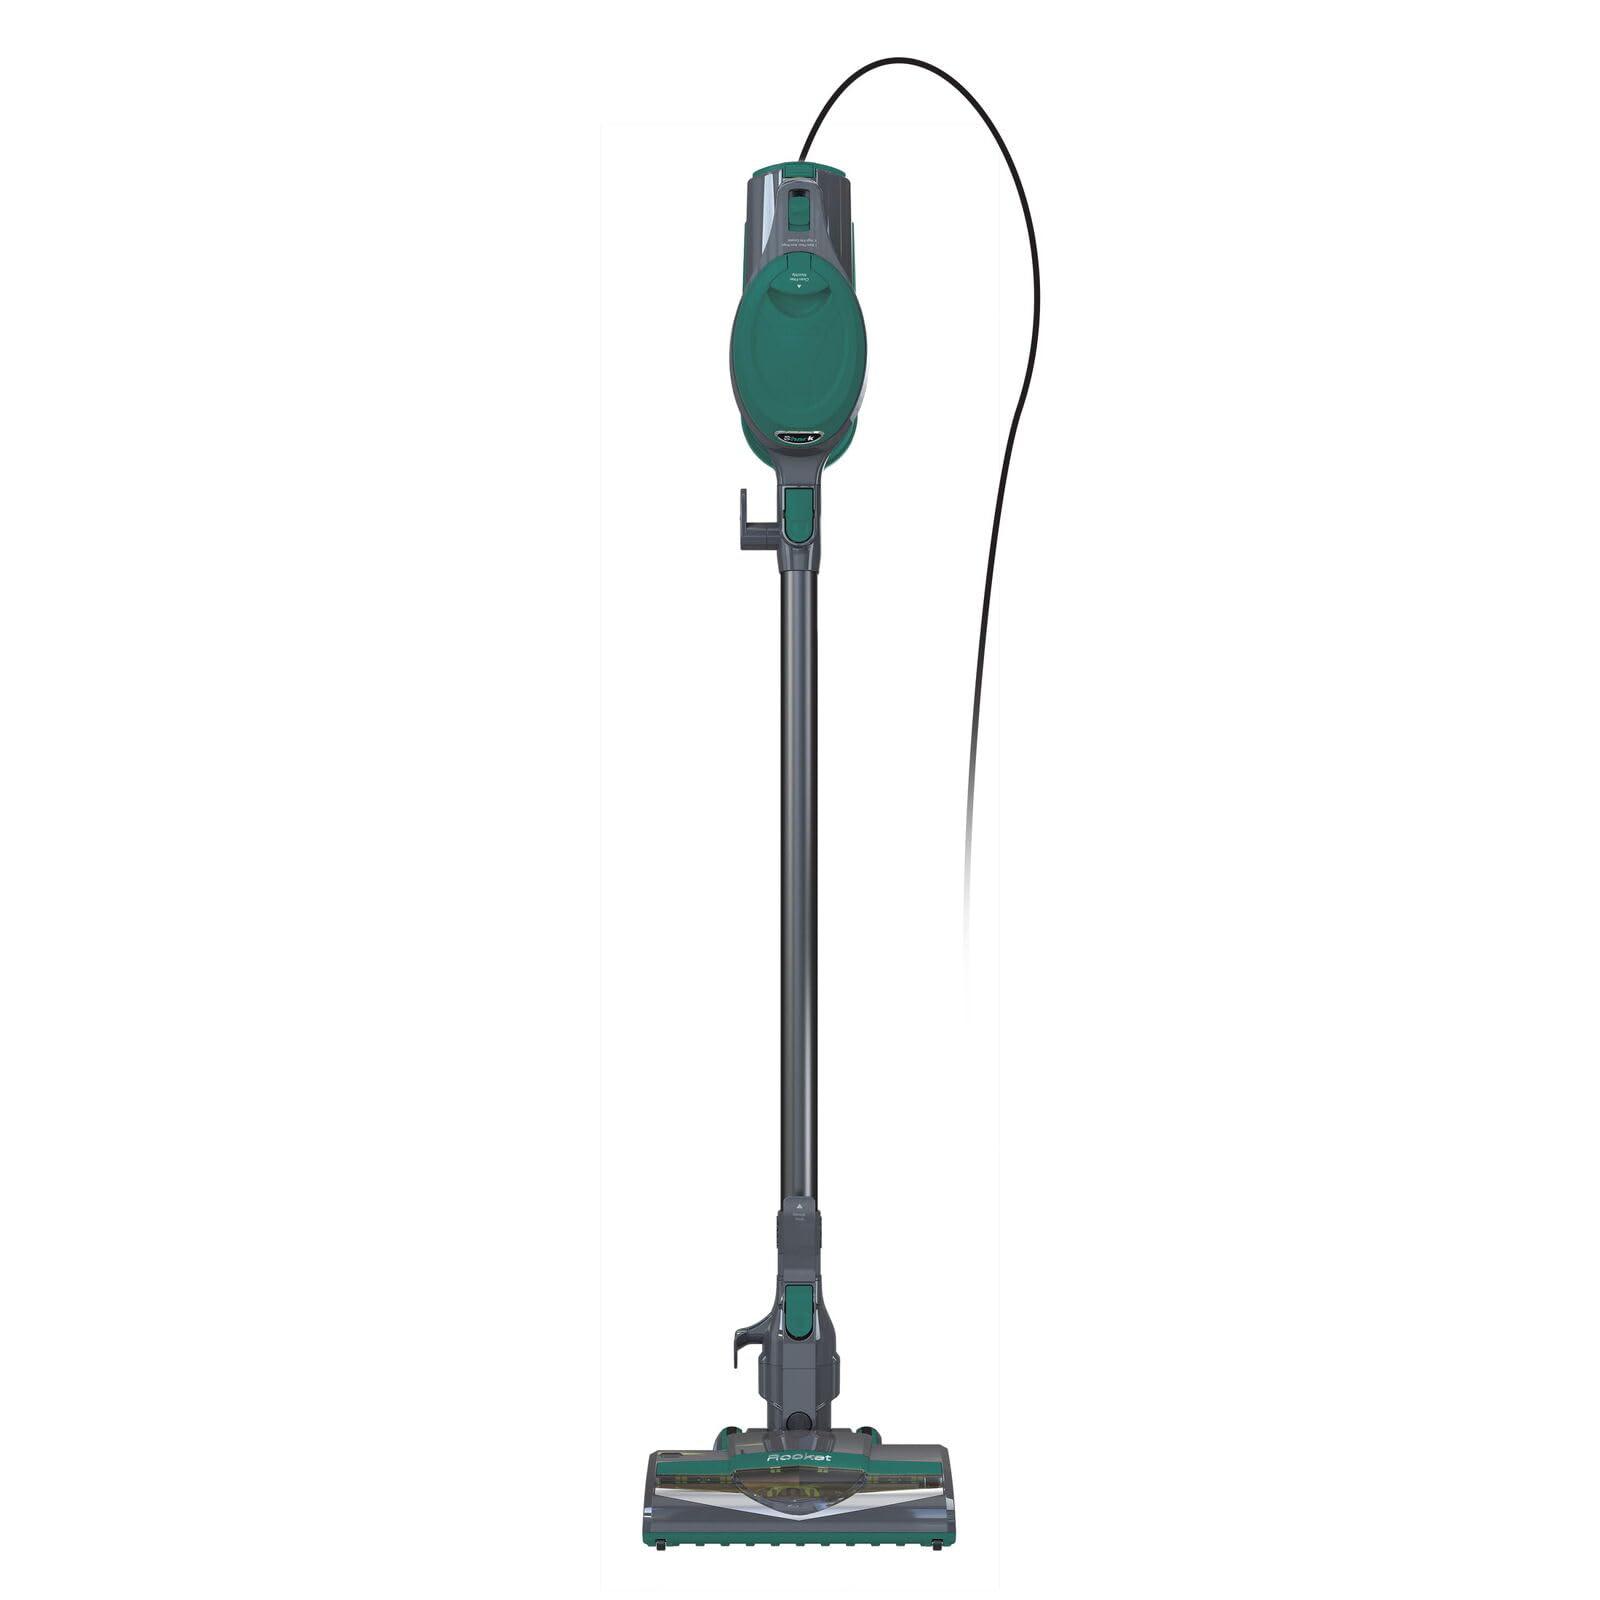 shark cs110 ultra lightweight corded stick vacuum with easy empty cup, fingertip controls, powerful suction and advanced swiv